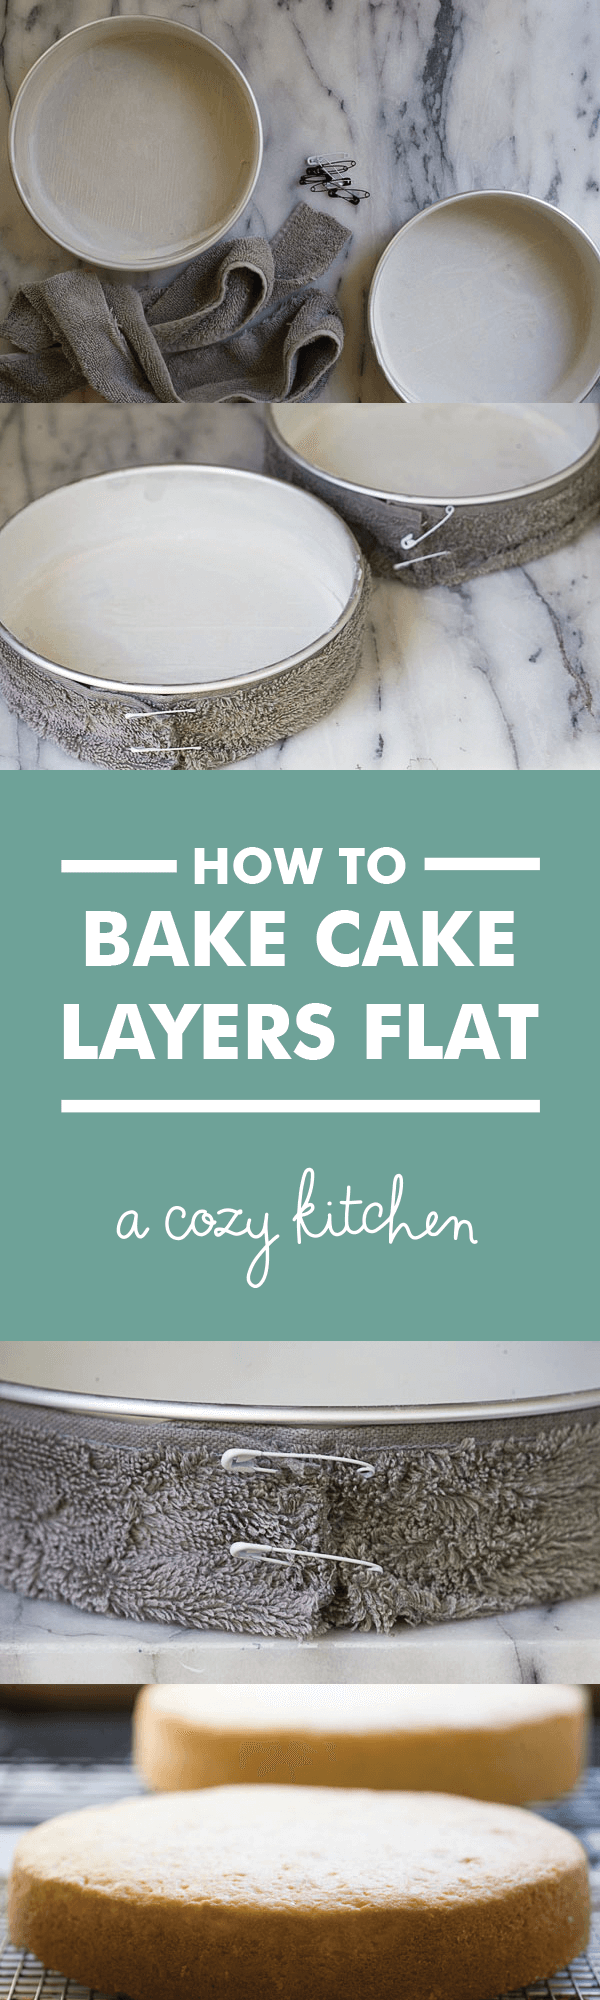 How to make the cake bloom evenly